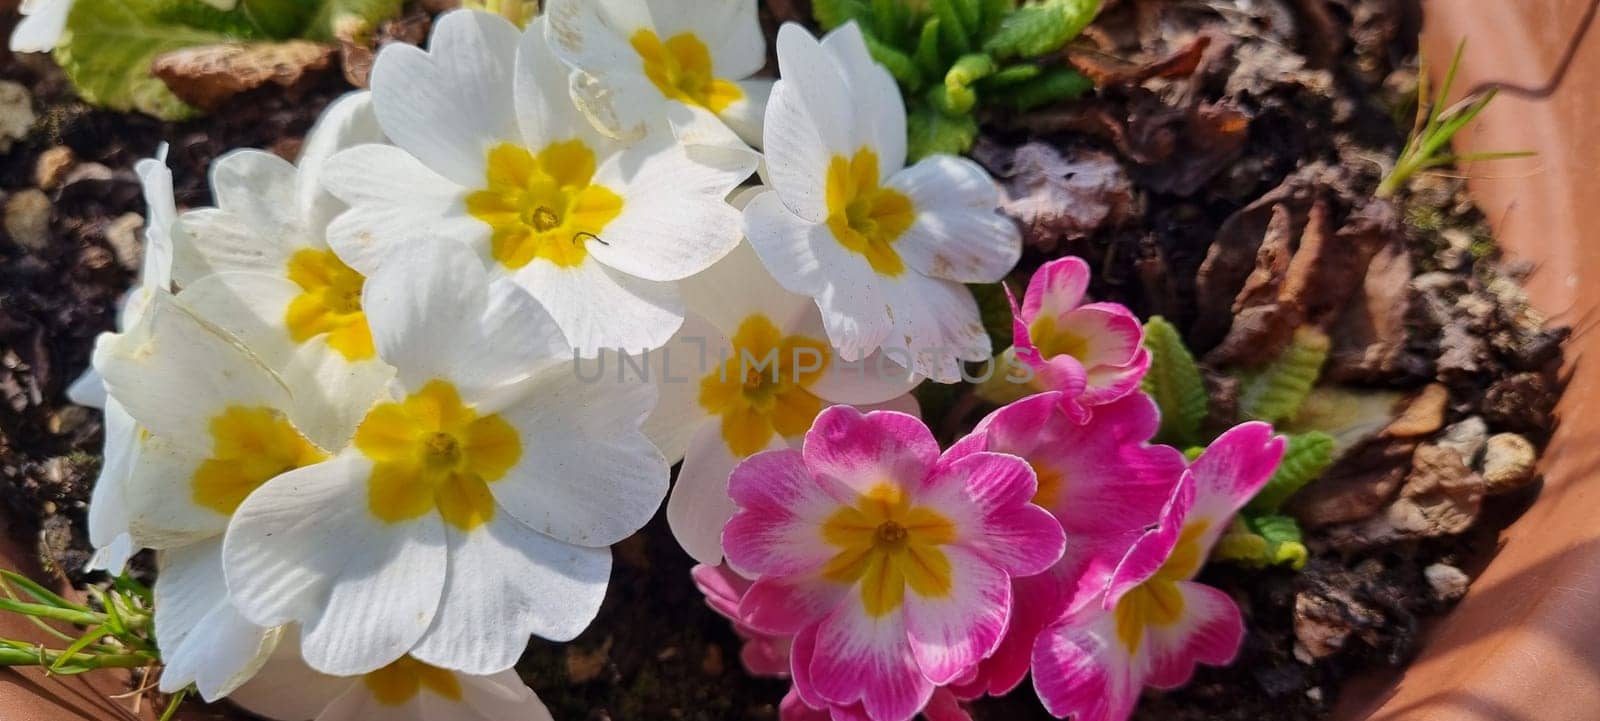 Vibrant white and pink primrose flowers blooming in a garden pot with natural light